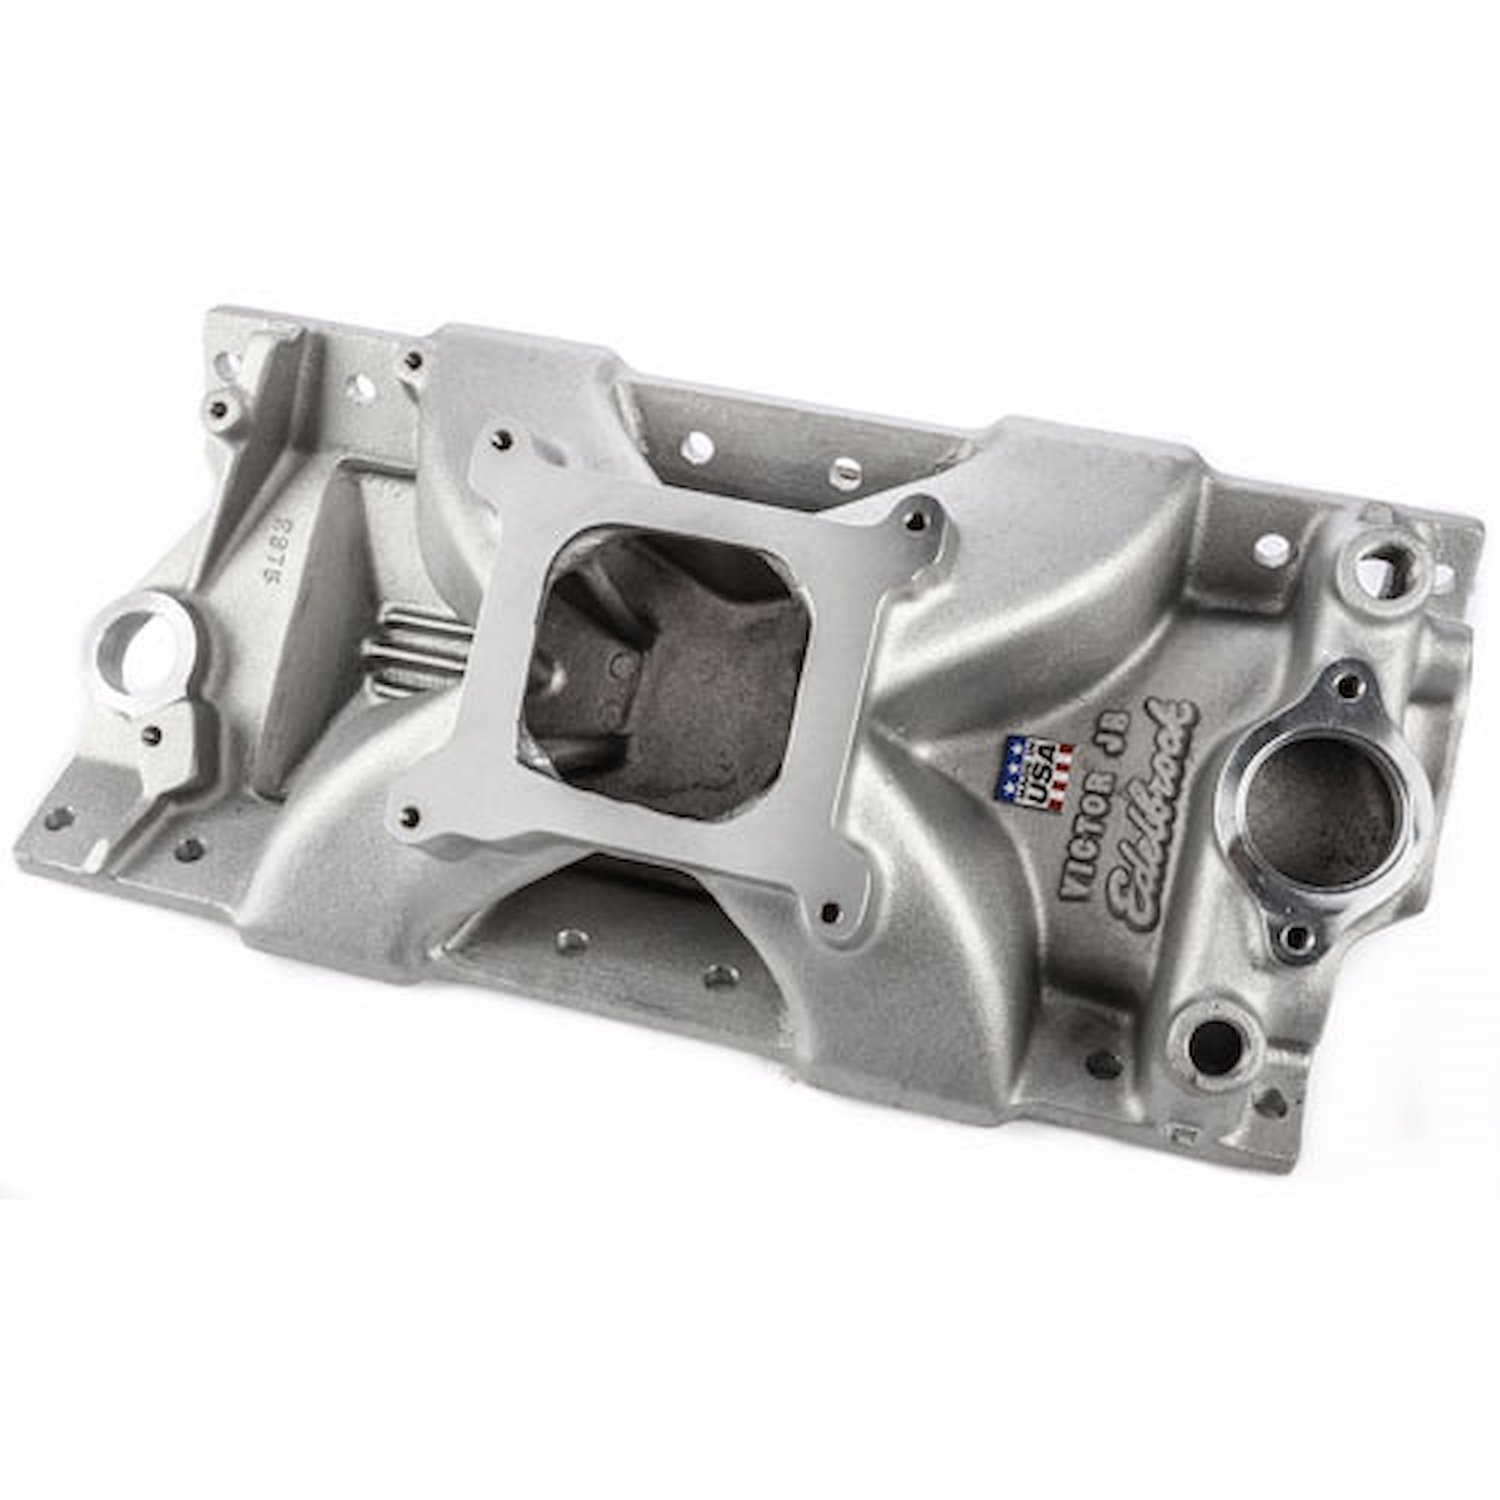 Victor Jr. Intake Manifold for Small Block Chevy